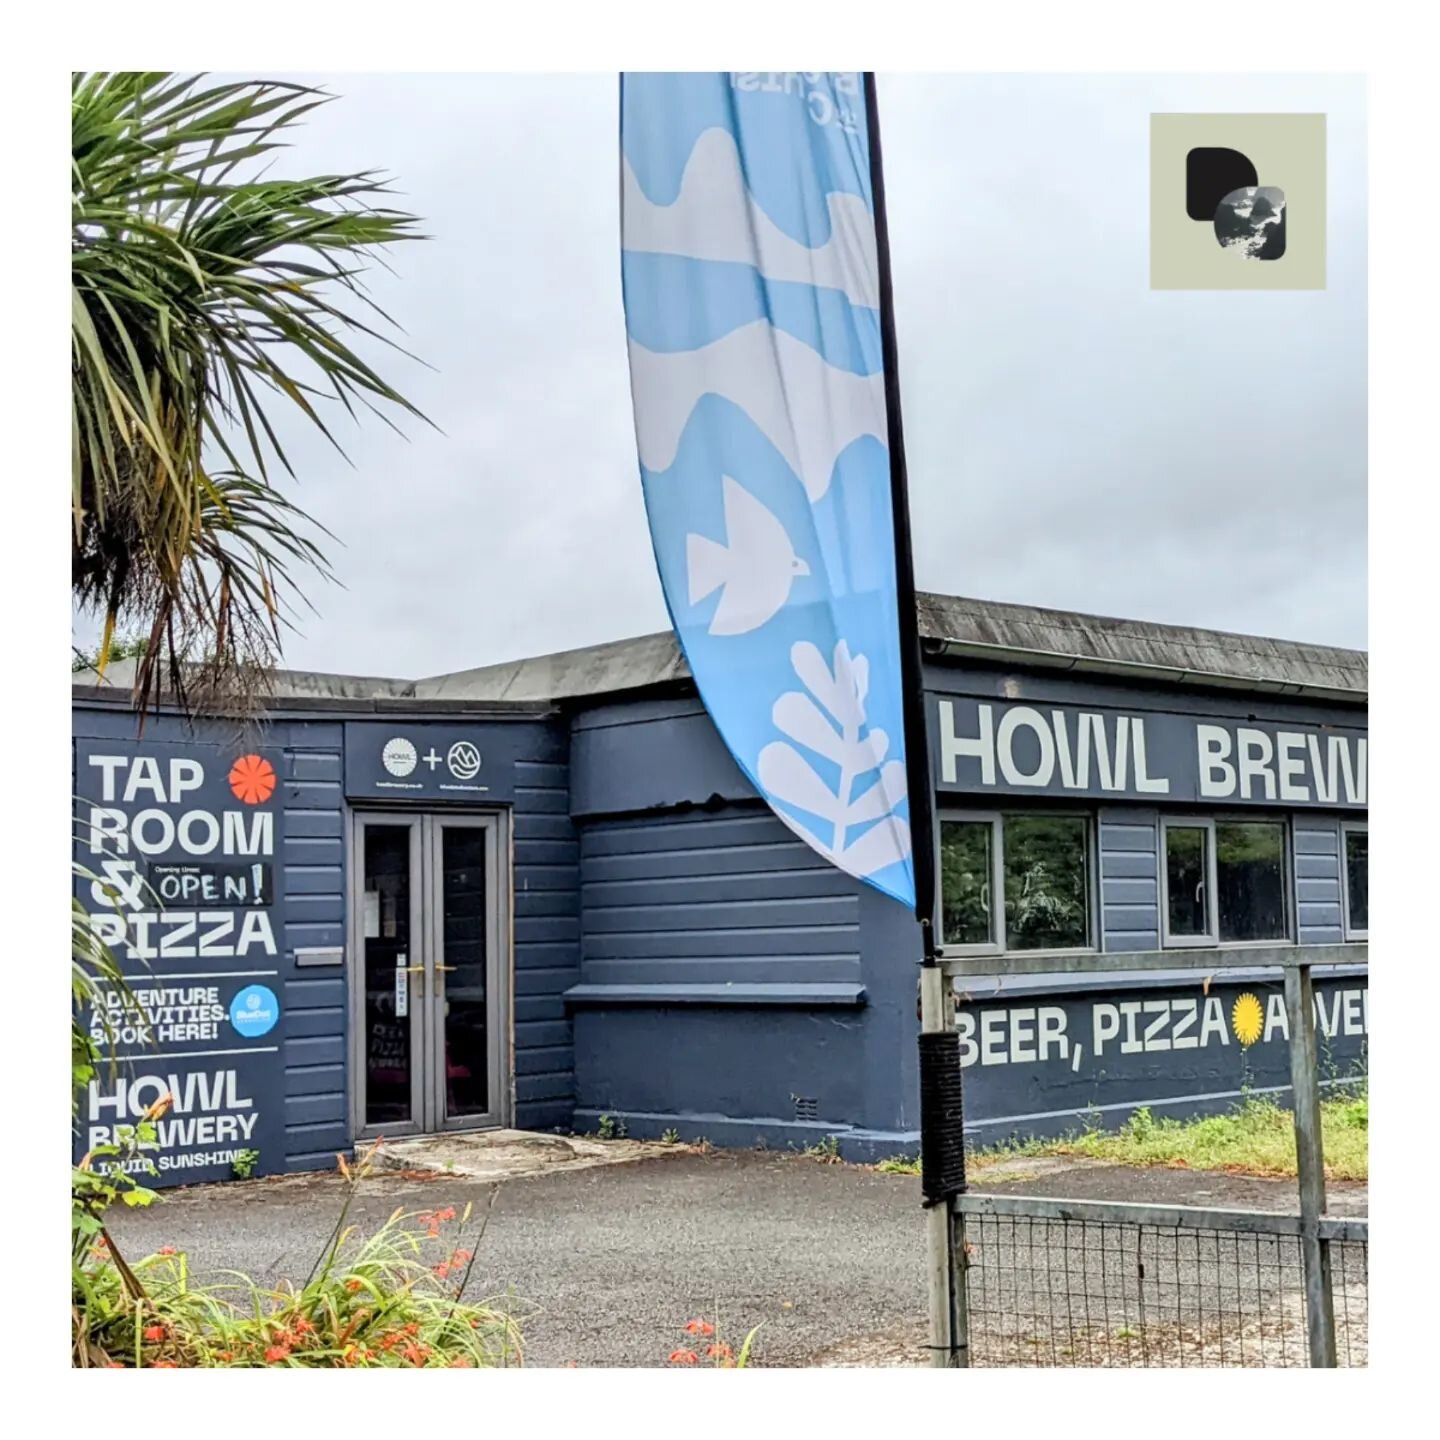 ⚪ SITE VISIT ⚪

Yesterday we had the pleasure of visiting one of our most exciting clients. 

We can't wait to see how the plans develop for @howl.brewery and @bluedotadventure at their new home in Par, Cornwall.

A day filled with adventure followed